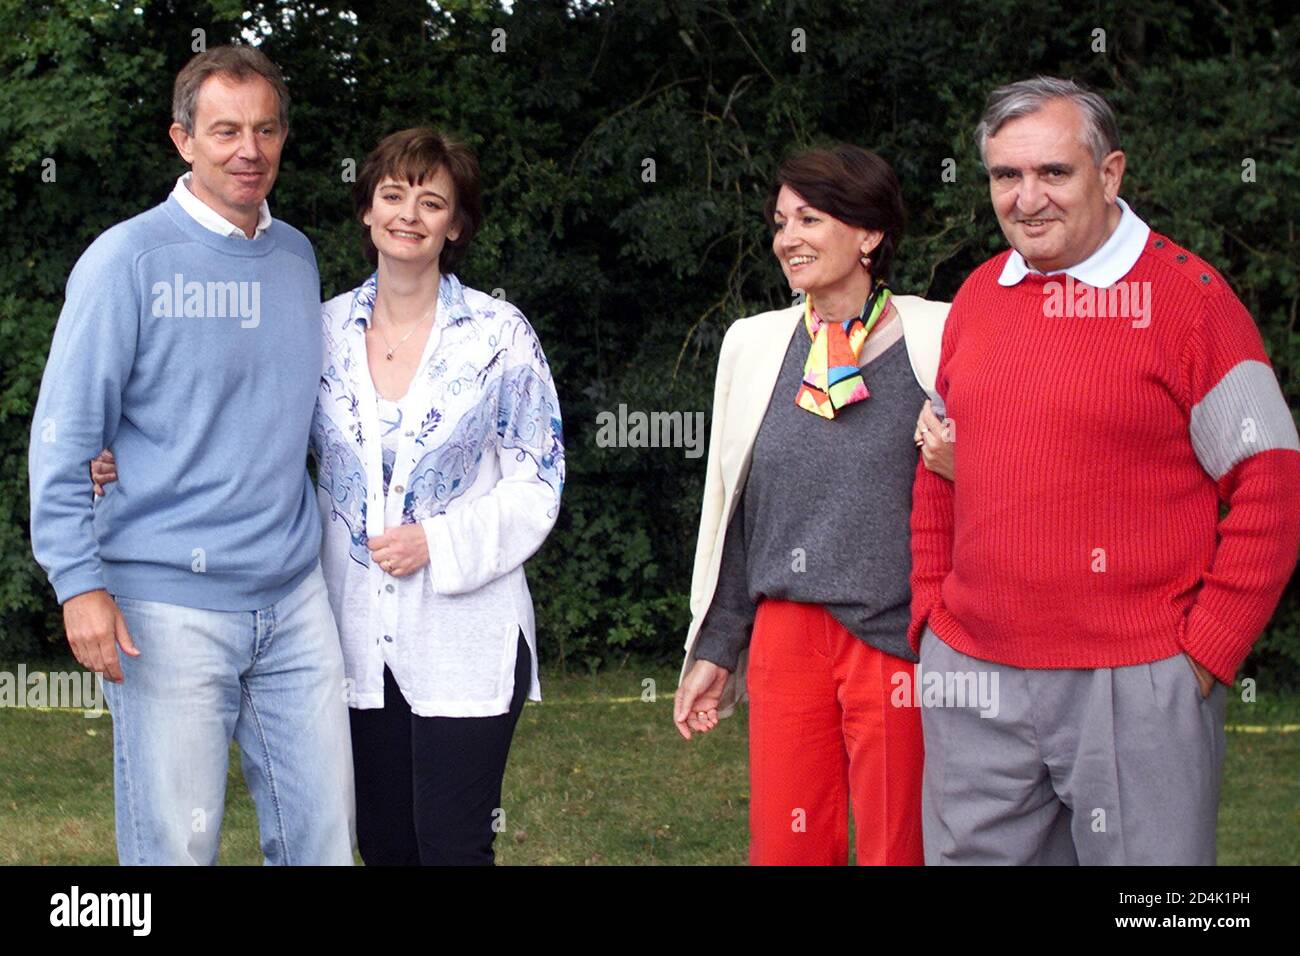 British prime Minister Tony Blair (L) and his wife Cherie pose with French prime Minister Jean-Pierre Raffarin (R) and his wife Anne-Marie during a private meeting at Lagrezette chateau in Caillac, southwestern France, August 12, 2002. Blair and Raffarin interrupted their holidays to meet for informal talks, with police saying the meeting was 'strictly private'. REUTERS/Jean-Philippe Arles  JPA/CRB Stock Photo